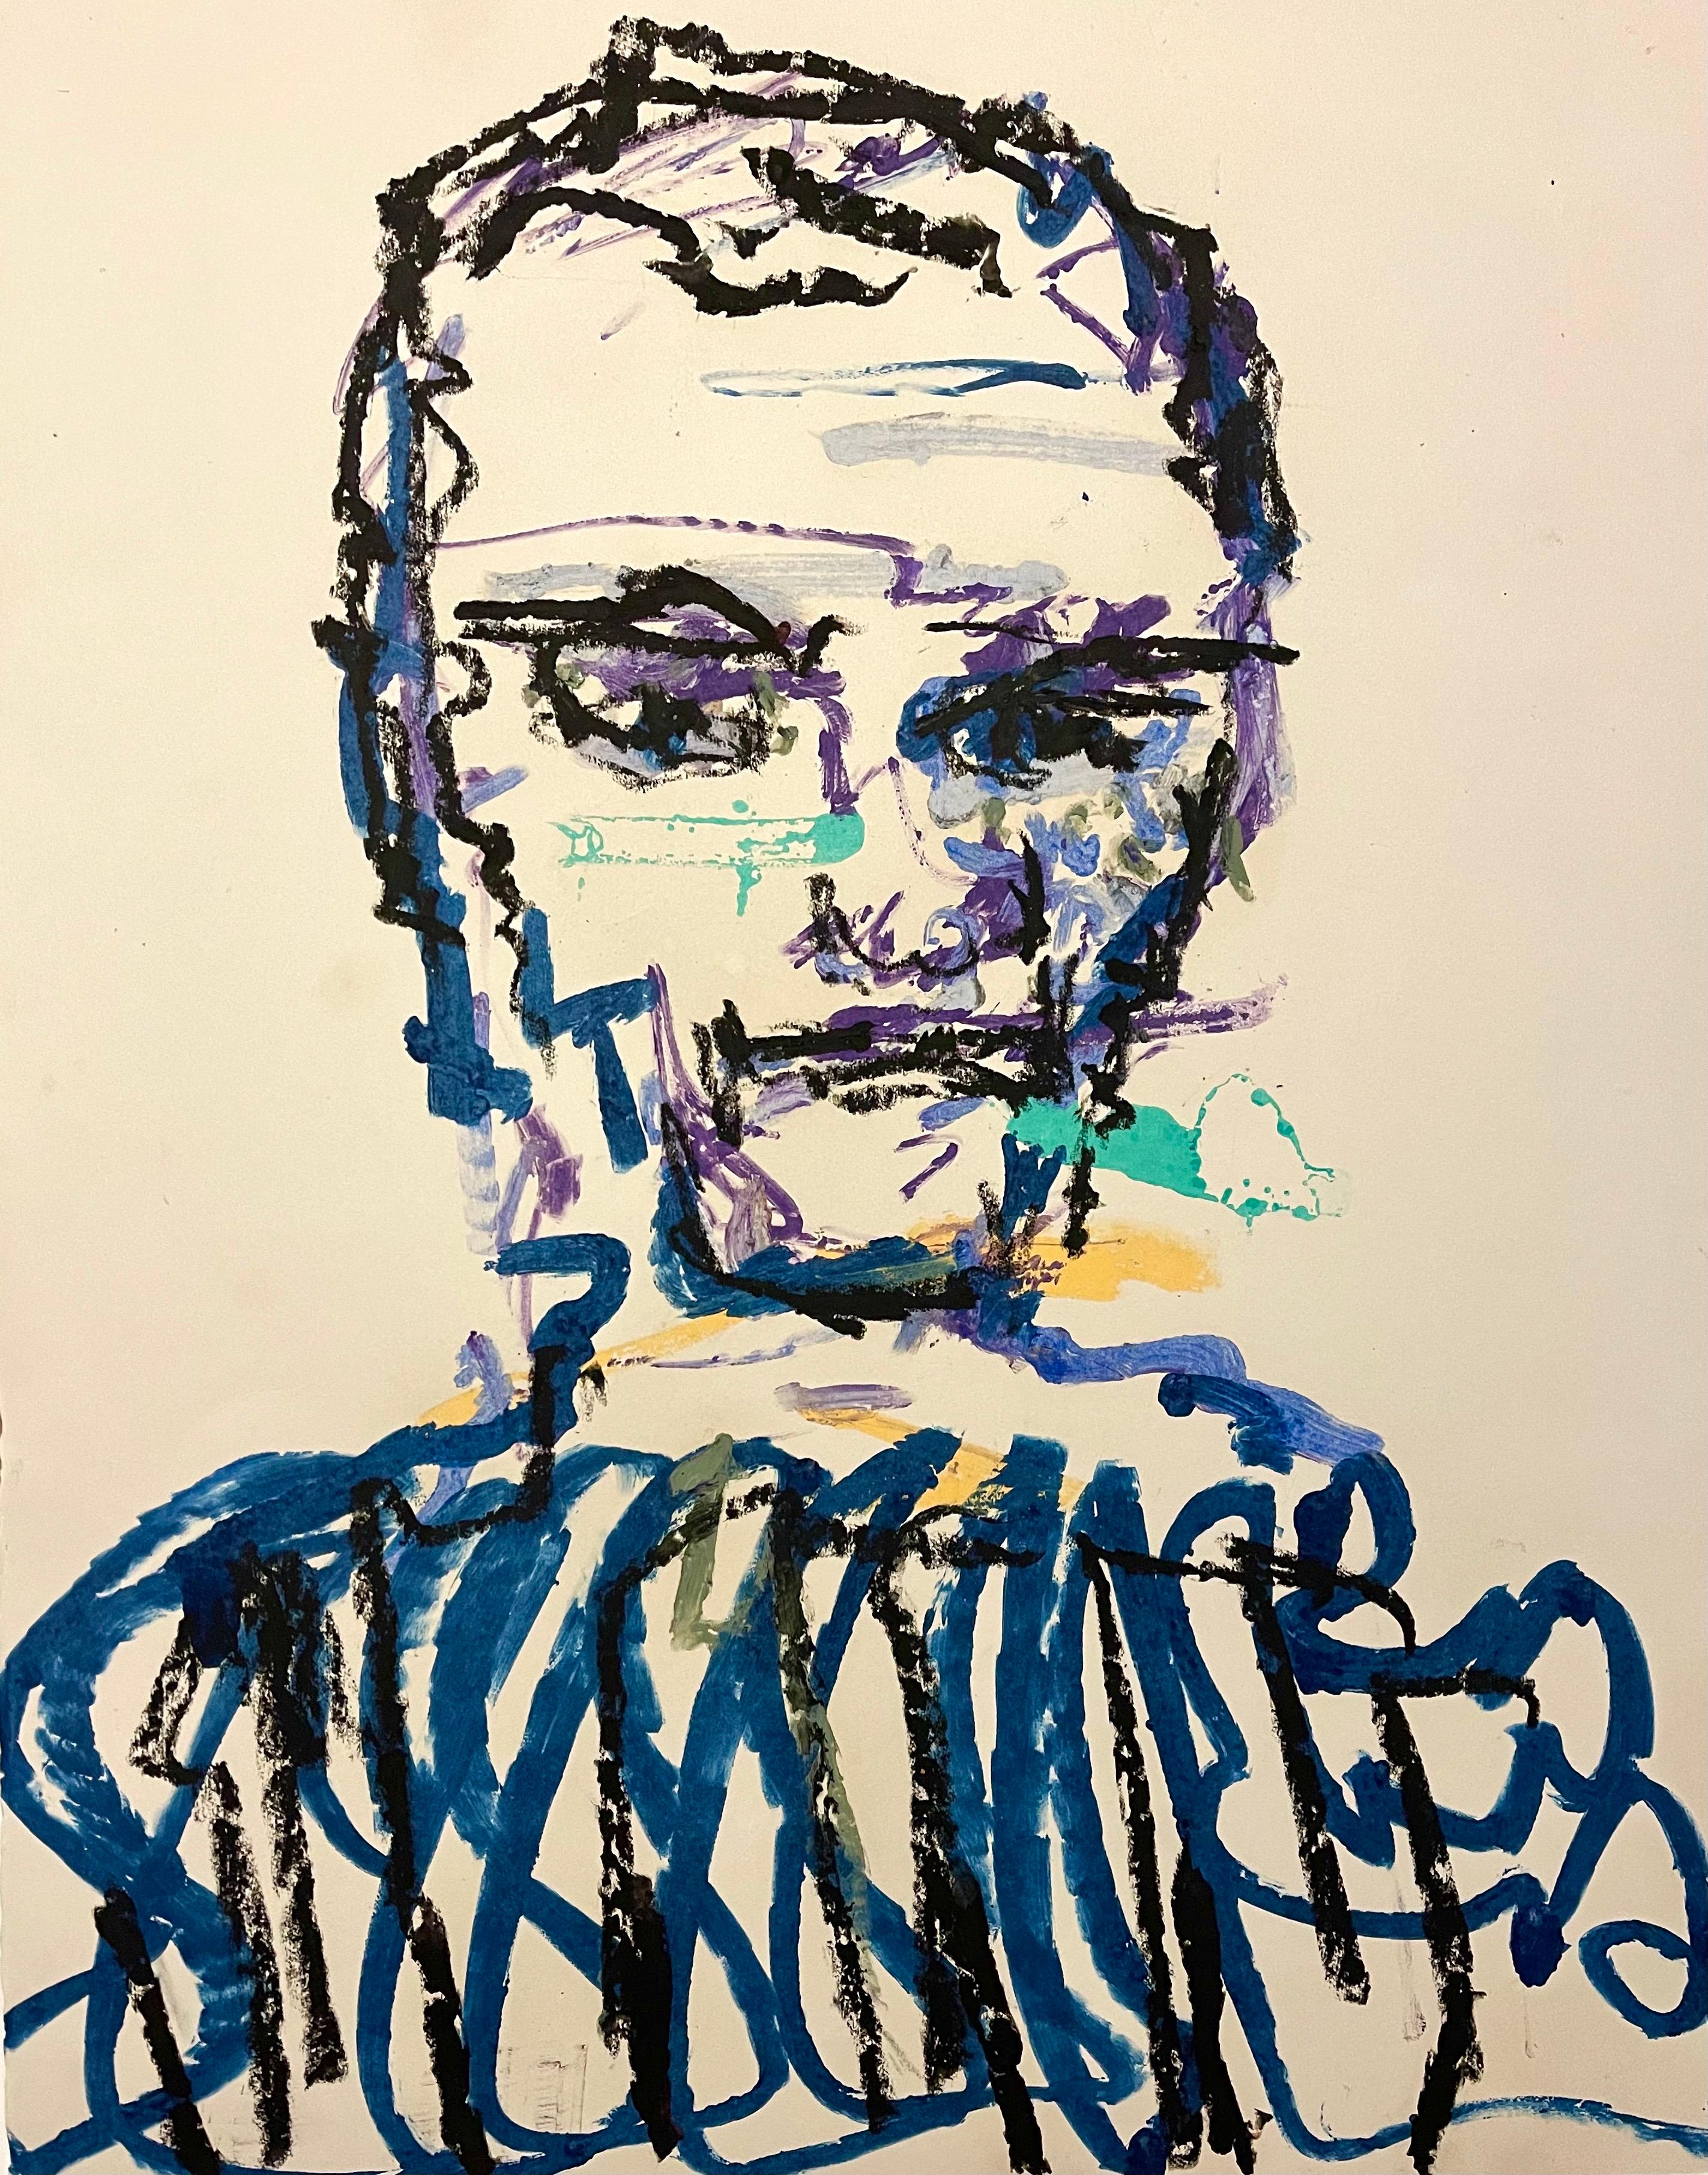 Stanley Boxer Mixed Media Abstract Expressionist Portrait Painting on Paper